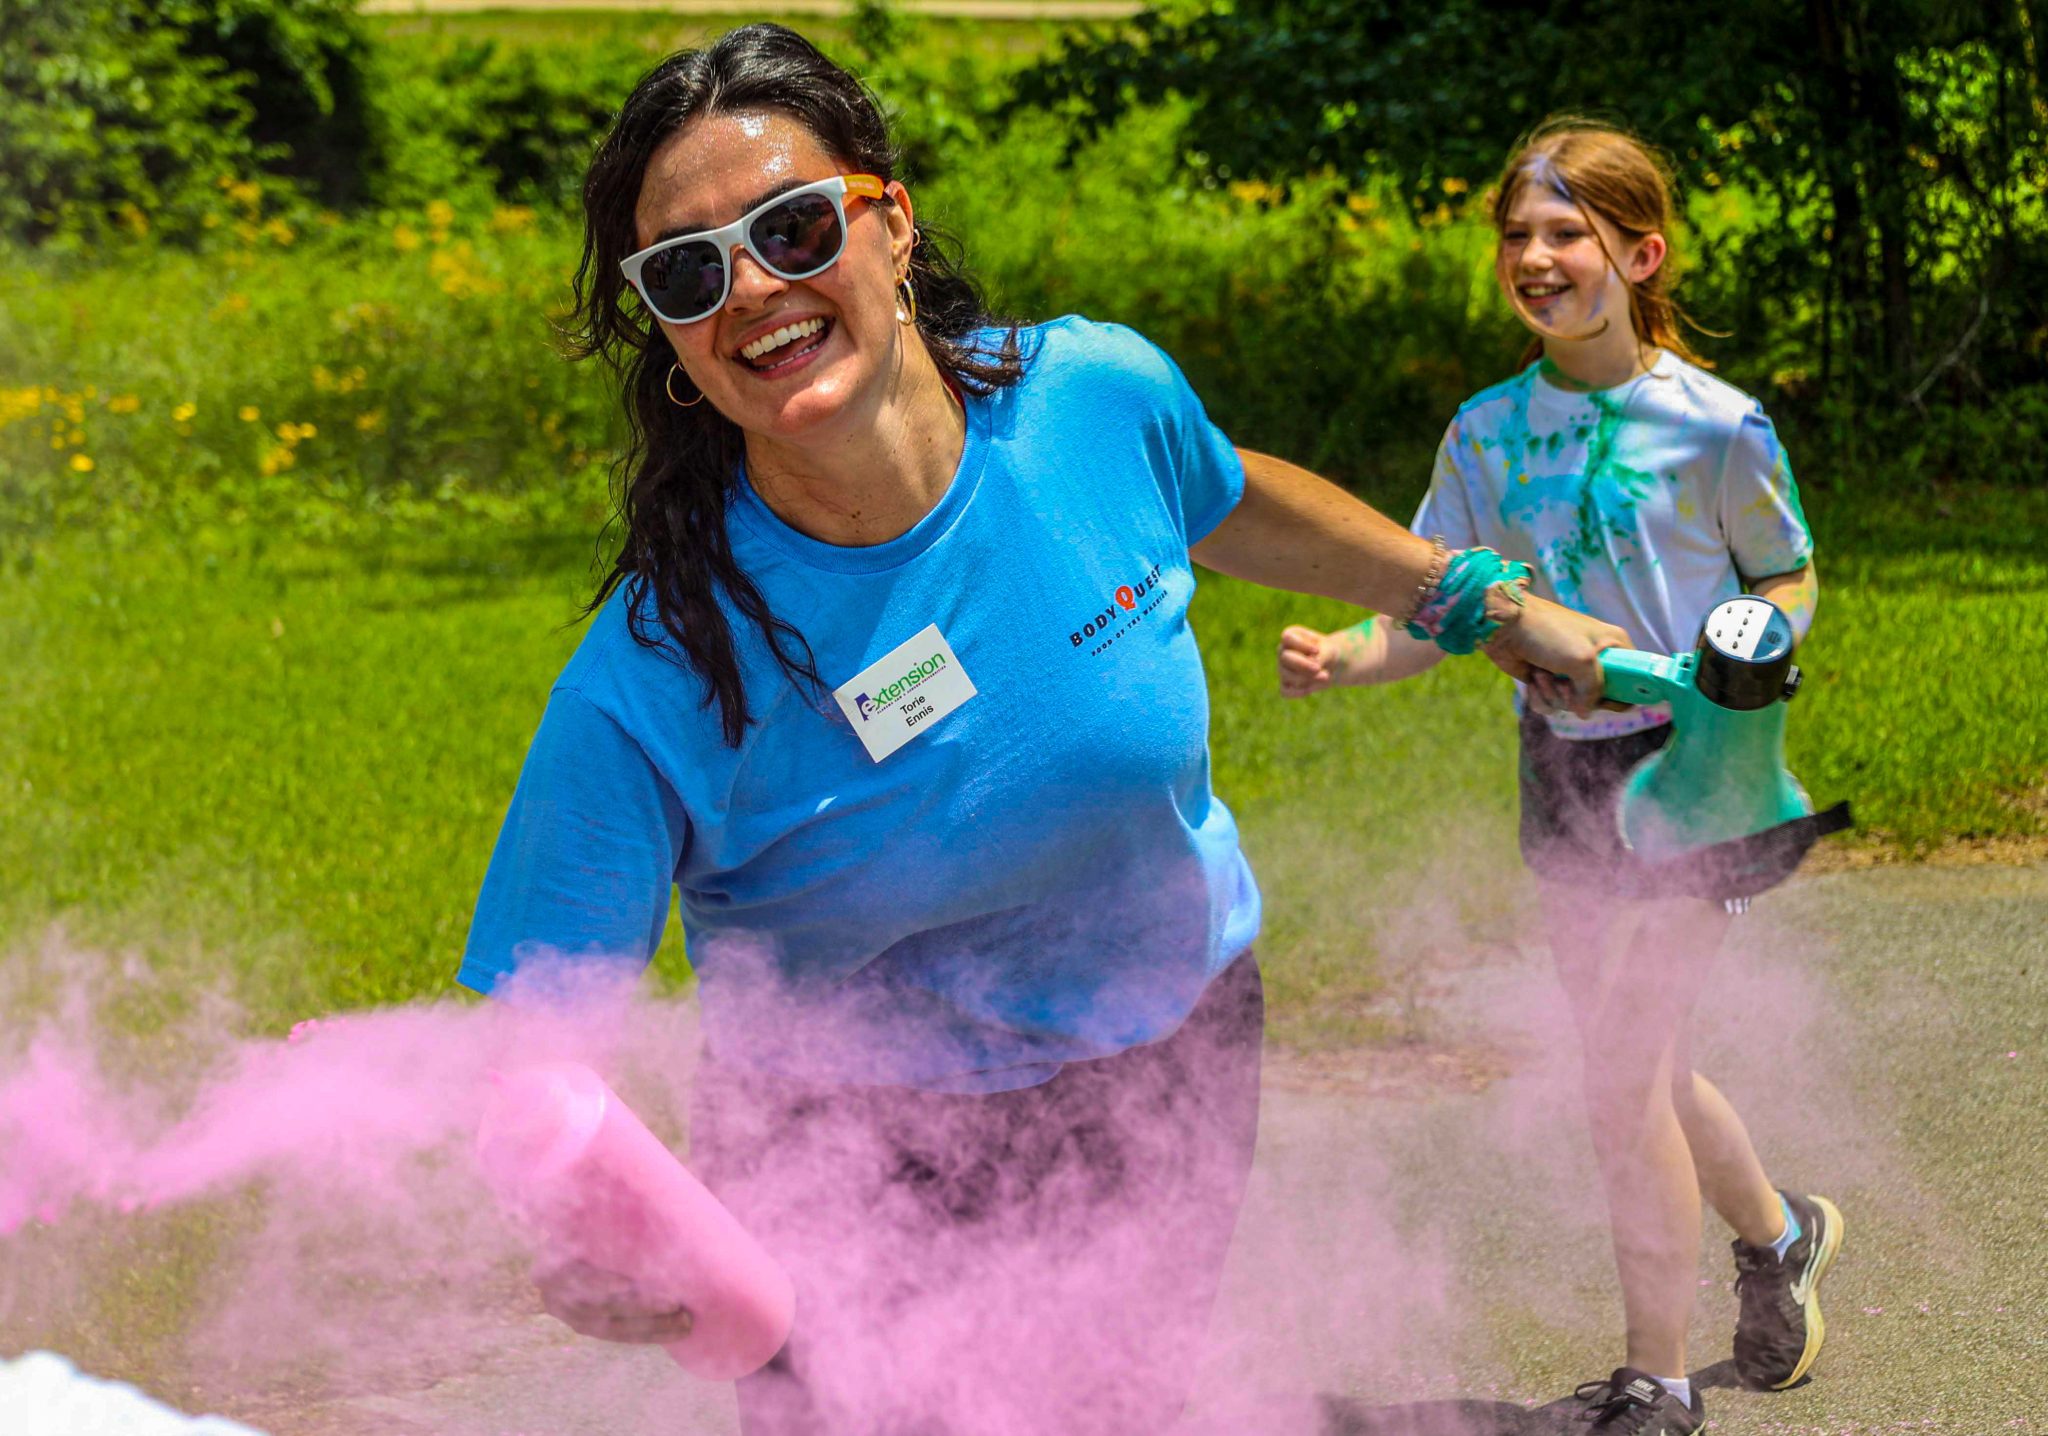 woman in blue shirt sprays pink dust during color run